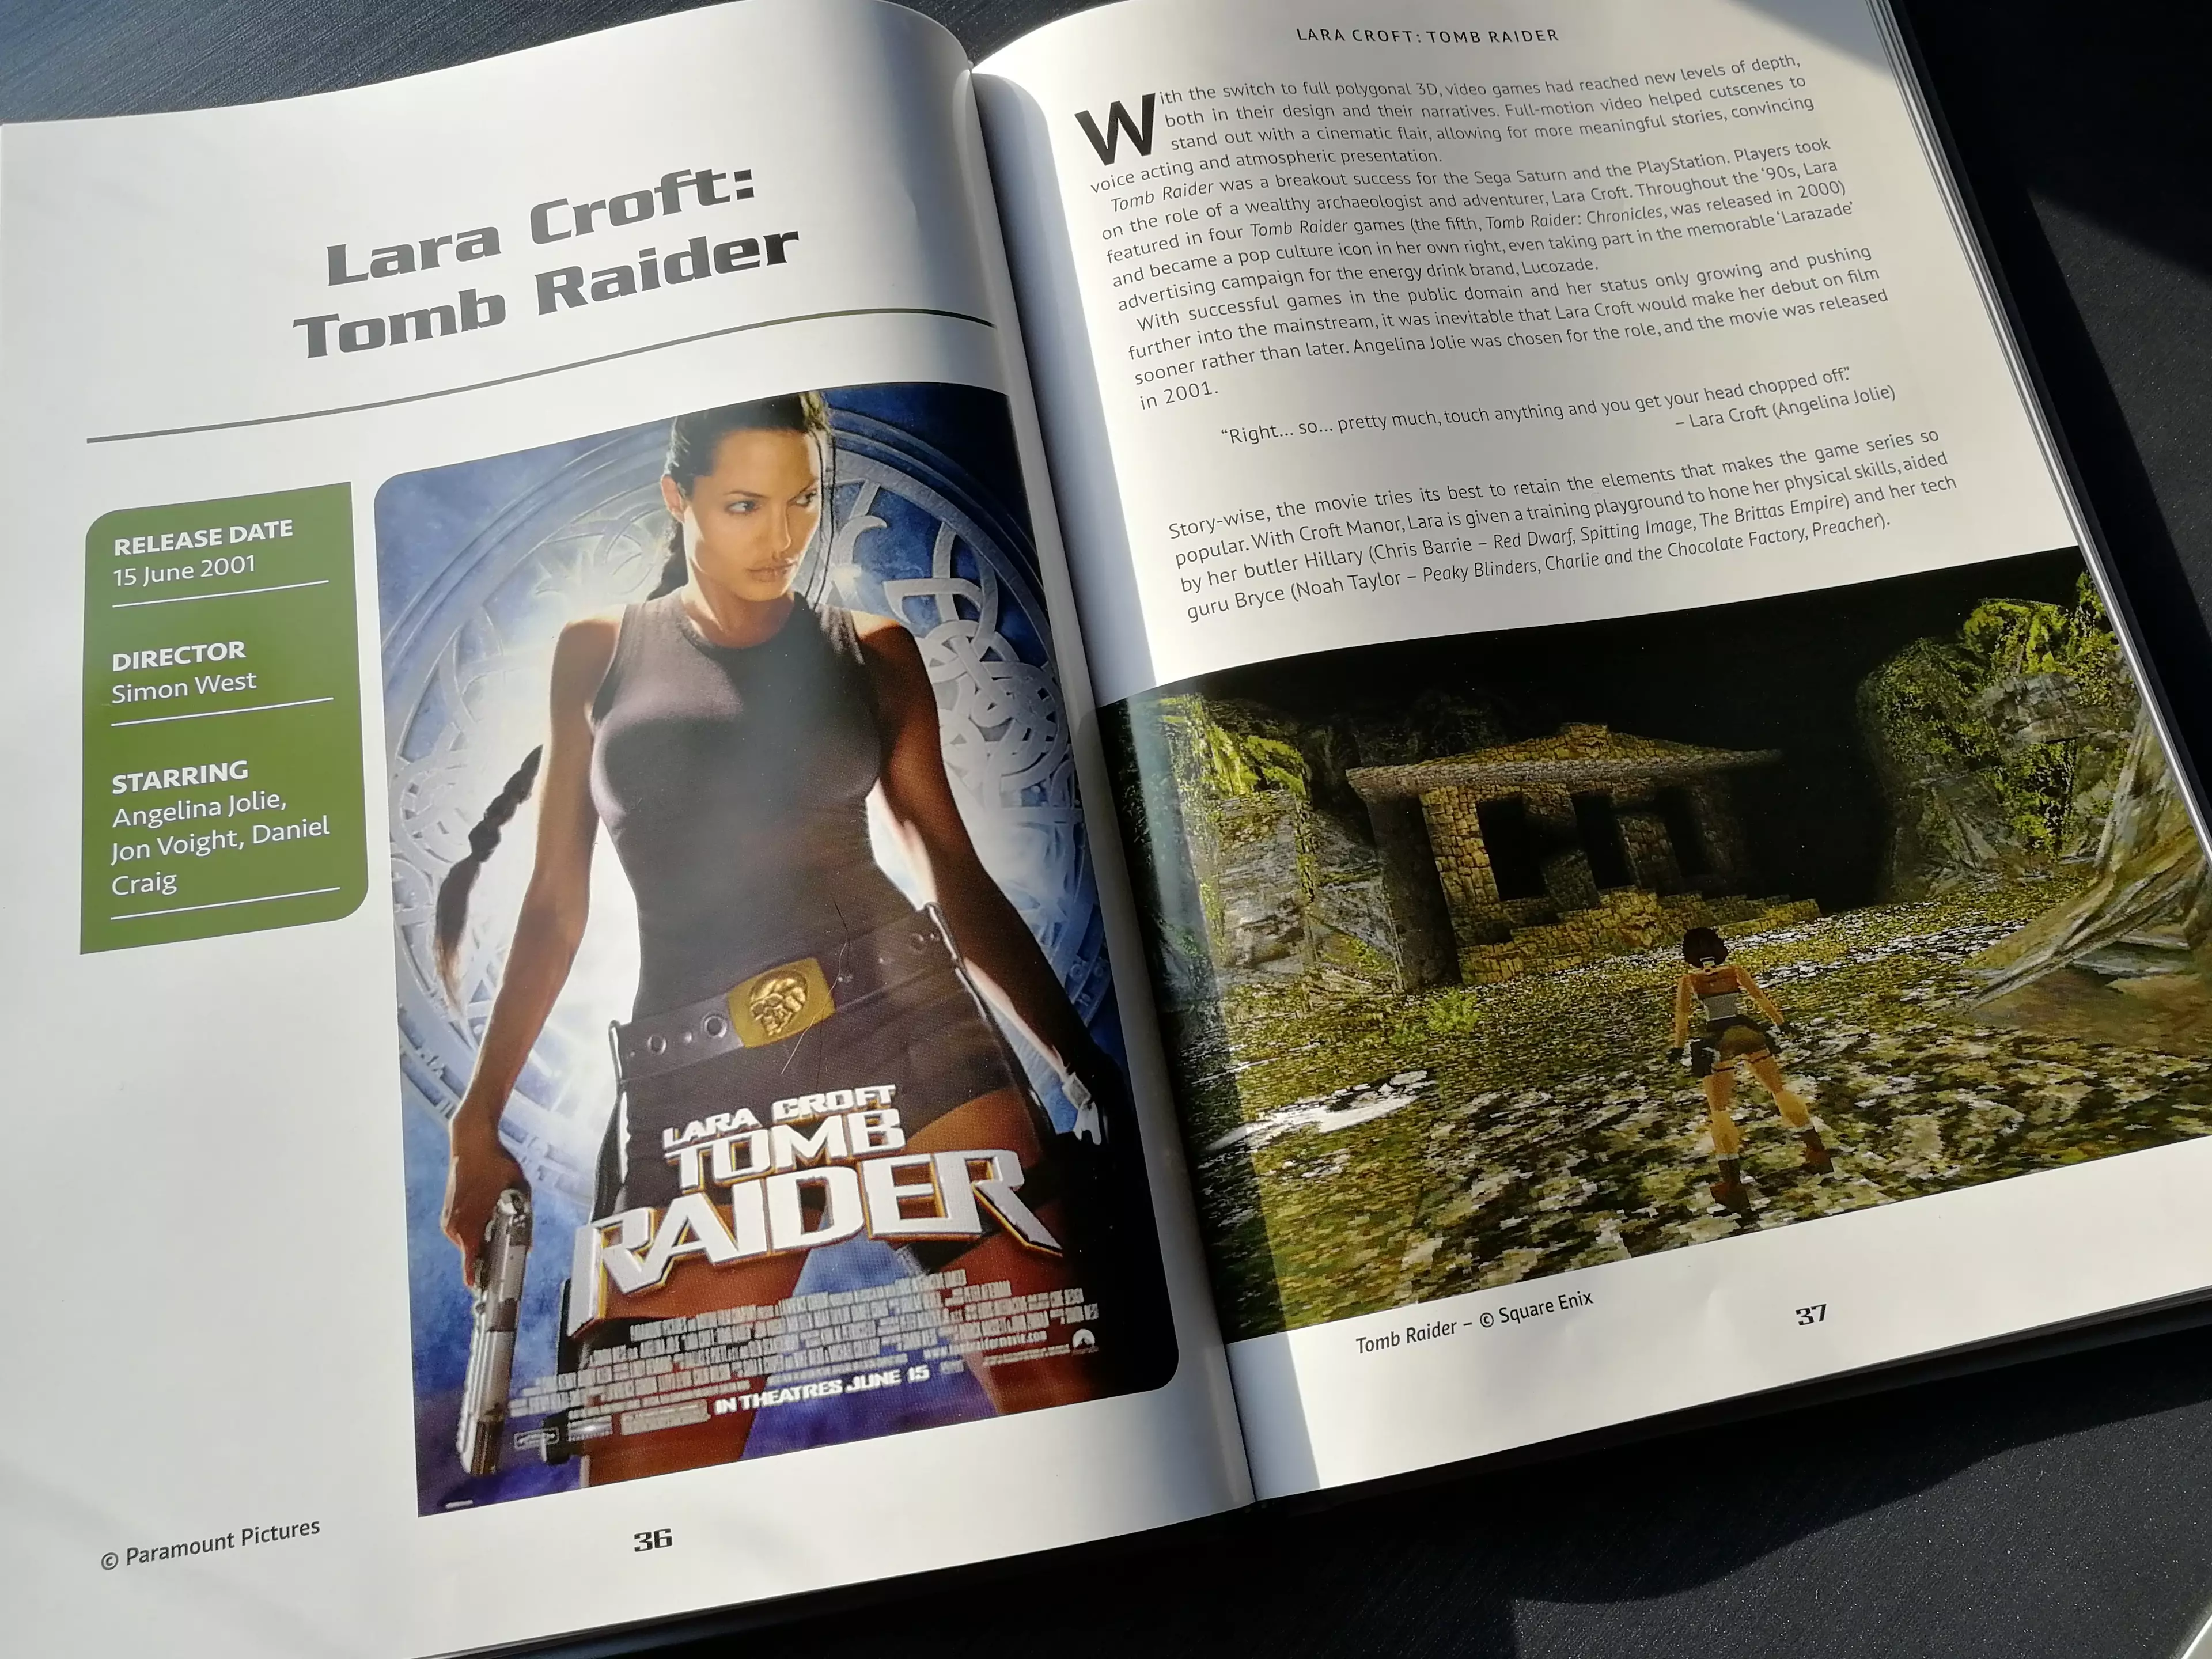 Each chapter relates the movie to the game that inspired it, as seen here with Tomb Raider /